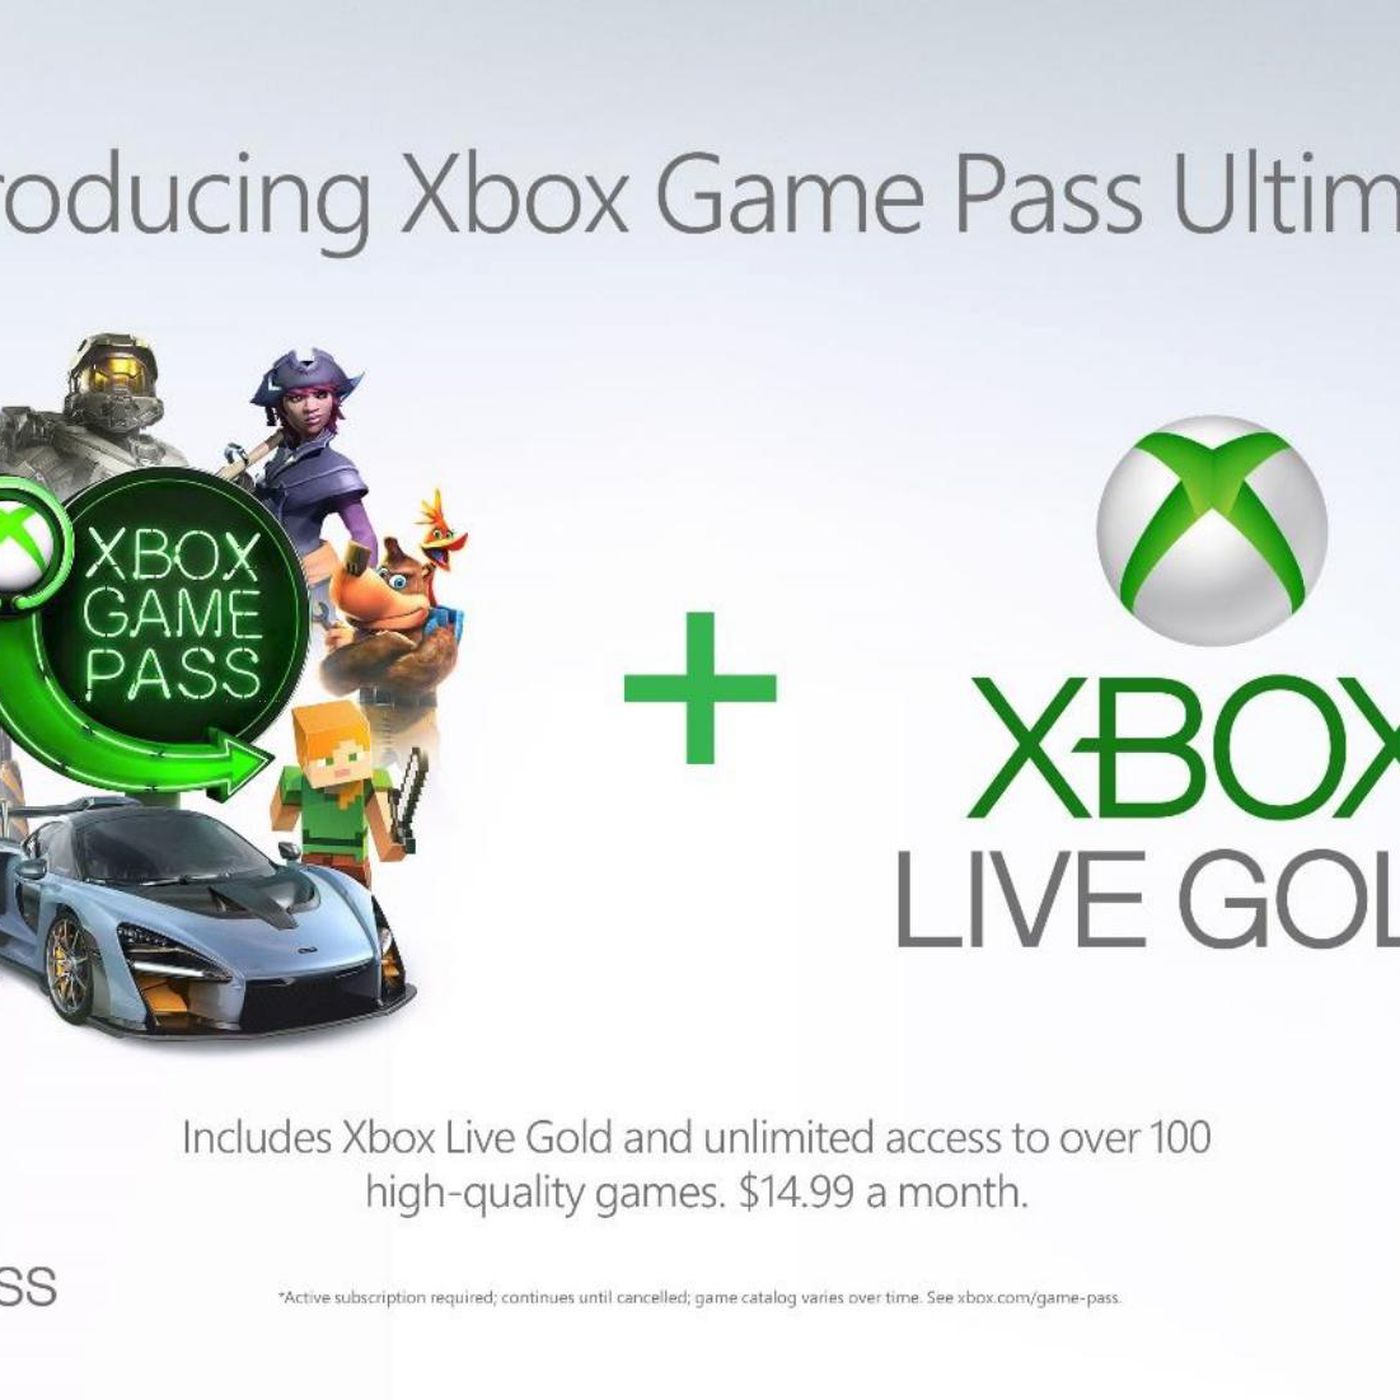 climax puzzle Reject Xbox Game Pass Ultimate: Xbox Live and Xbox Game Pass for $14.99 a month -  The Verge